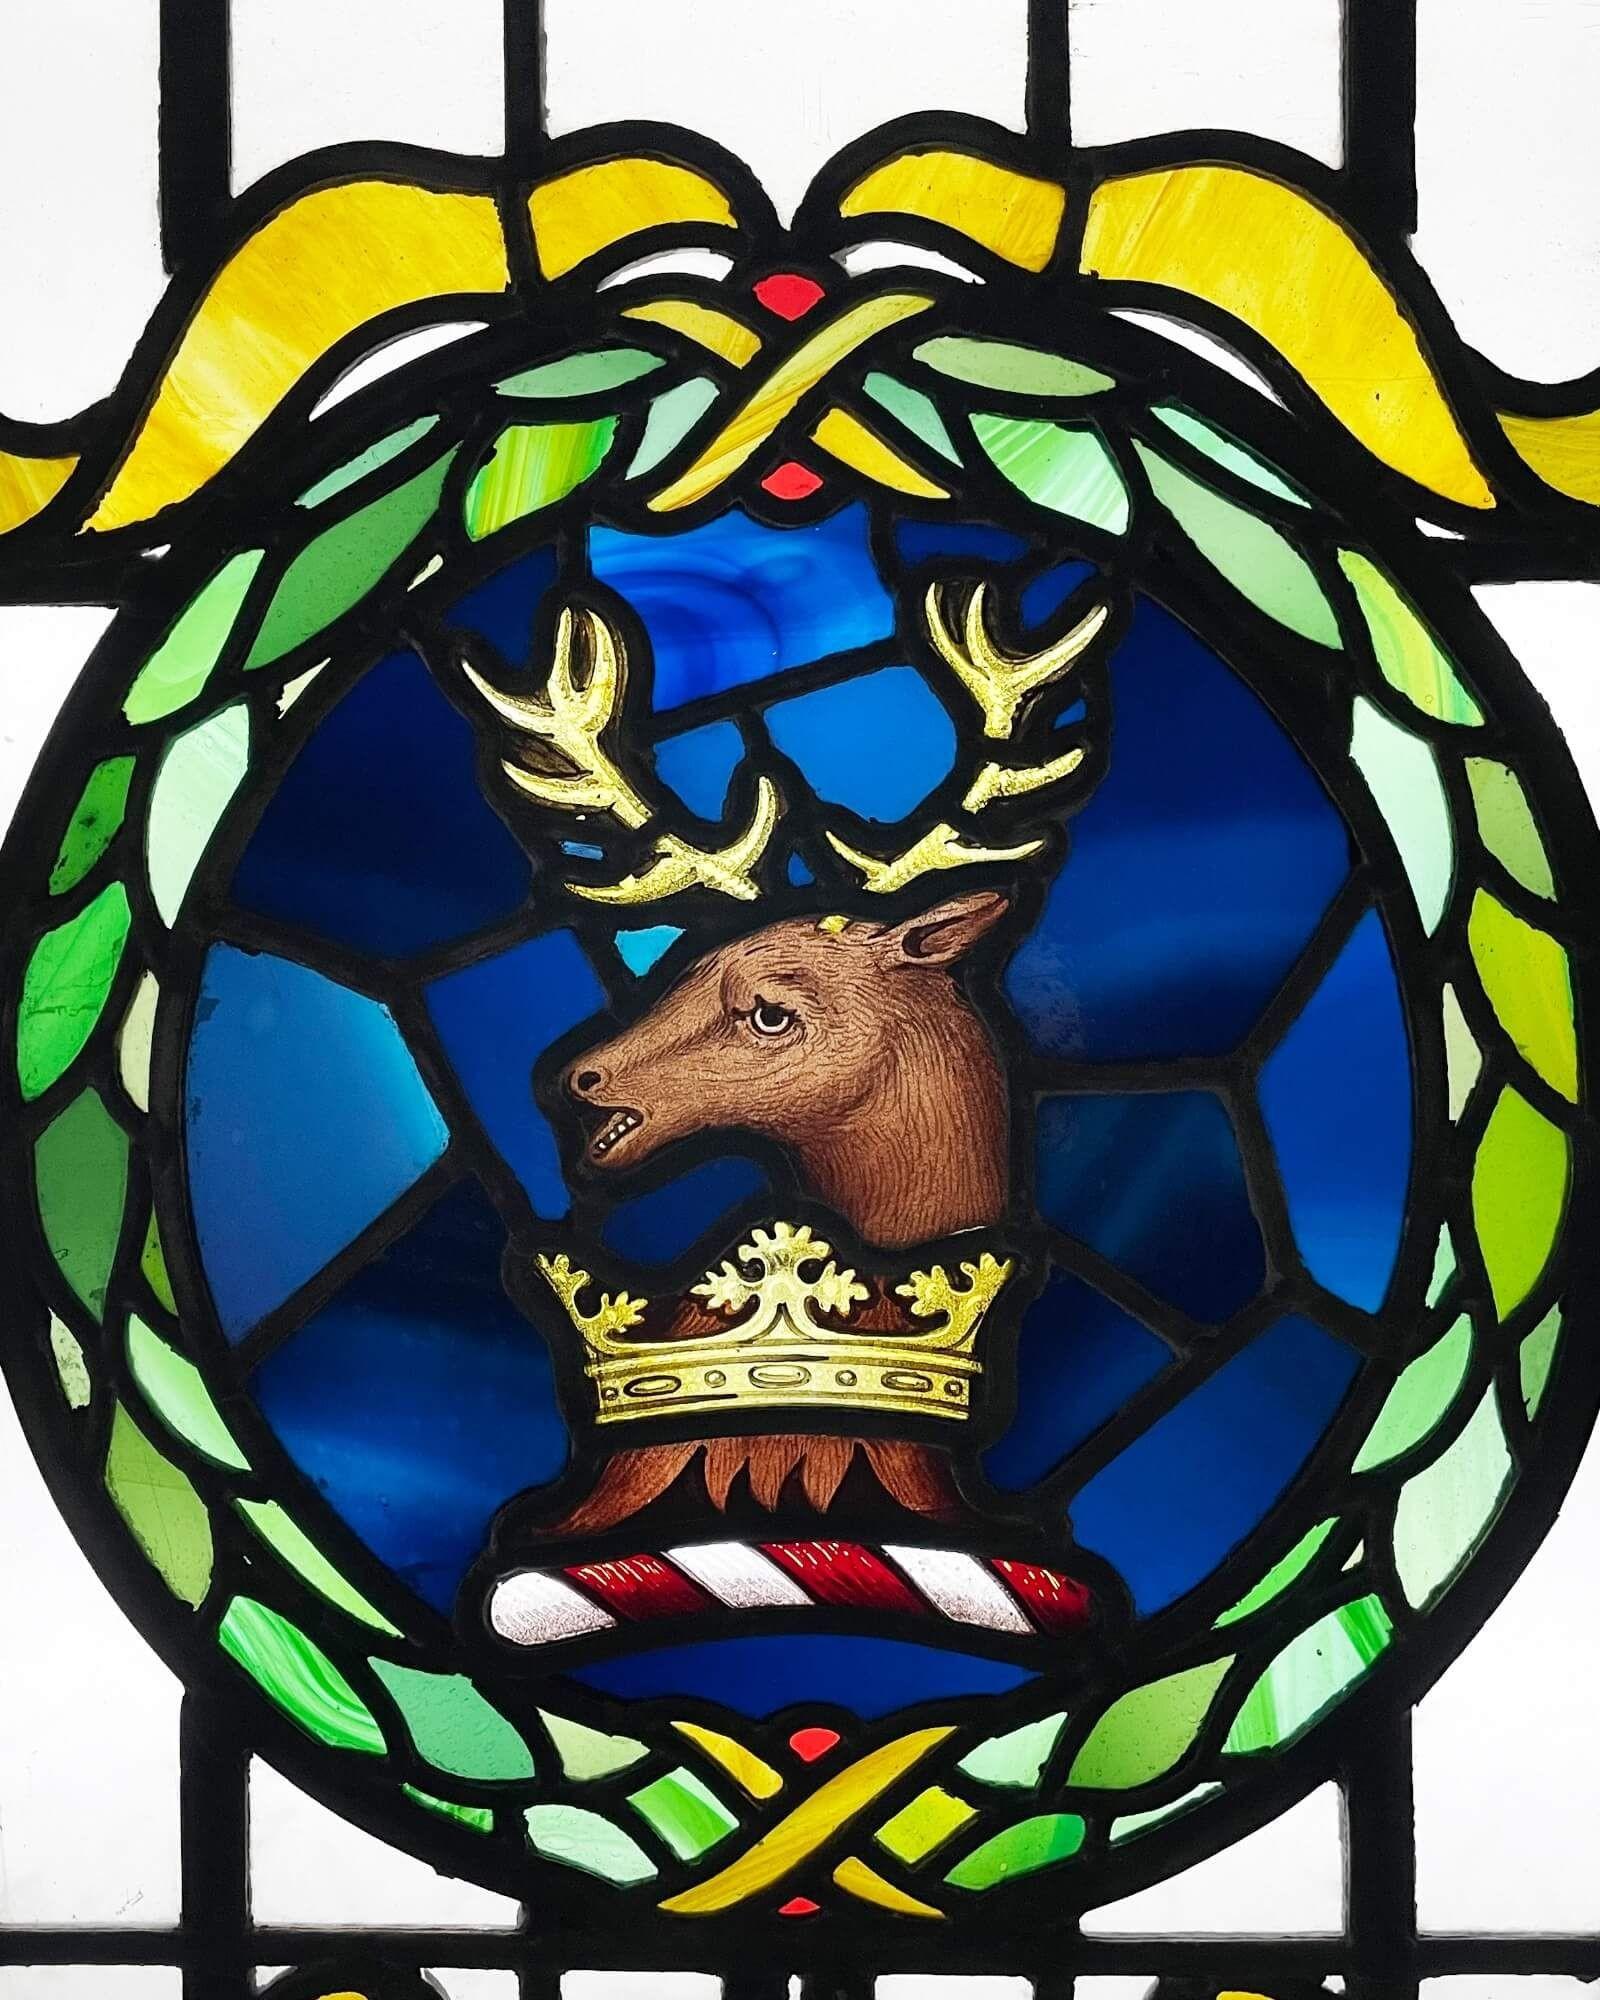 A large antique stained glass window of a crest depicting a stag in a wreath. Dating to circa 1900, this large panel exhibits vibrant handprinted colours. Pale green oval domes sit on top of the clear textured background.

The vivid imagery of this